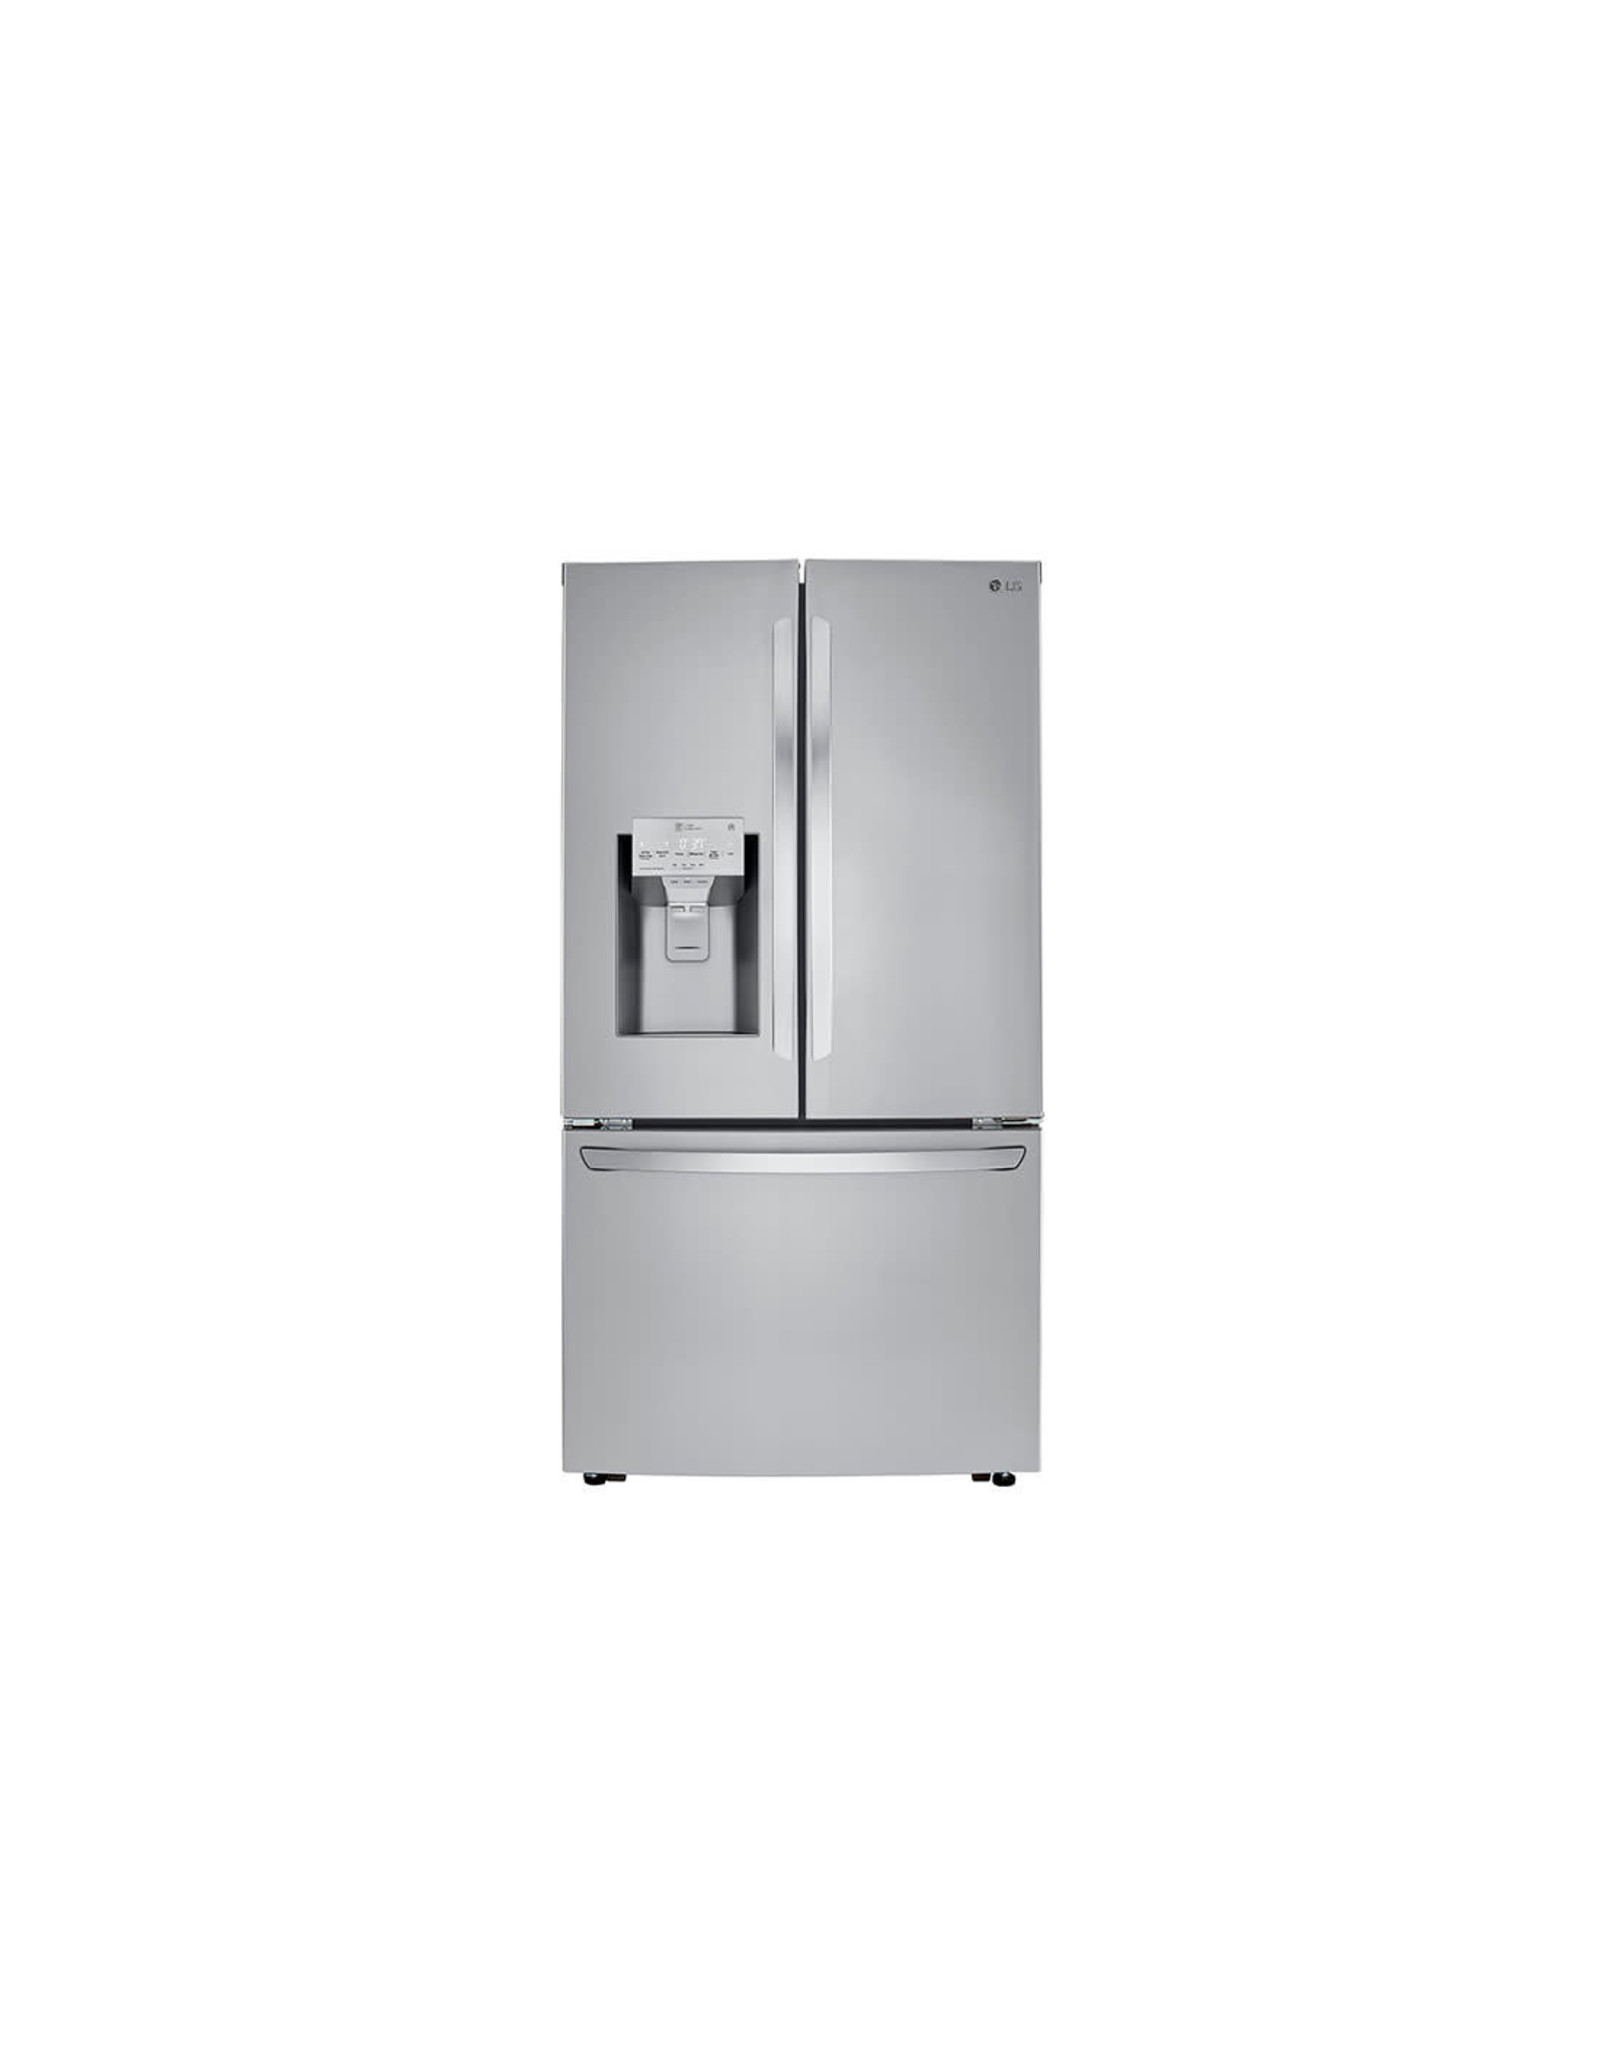 LG Electronics CK LRFXC2416S 23.5 cu. ft. Smart French Door Refrigerator, Dual Ice Makers with Craft Ice in PrintProof Stainless Steel, Counter Depth